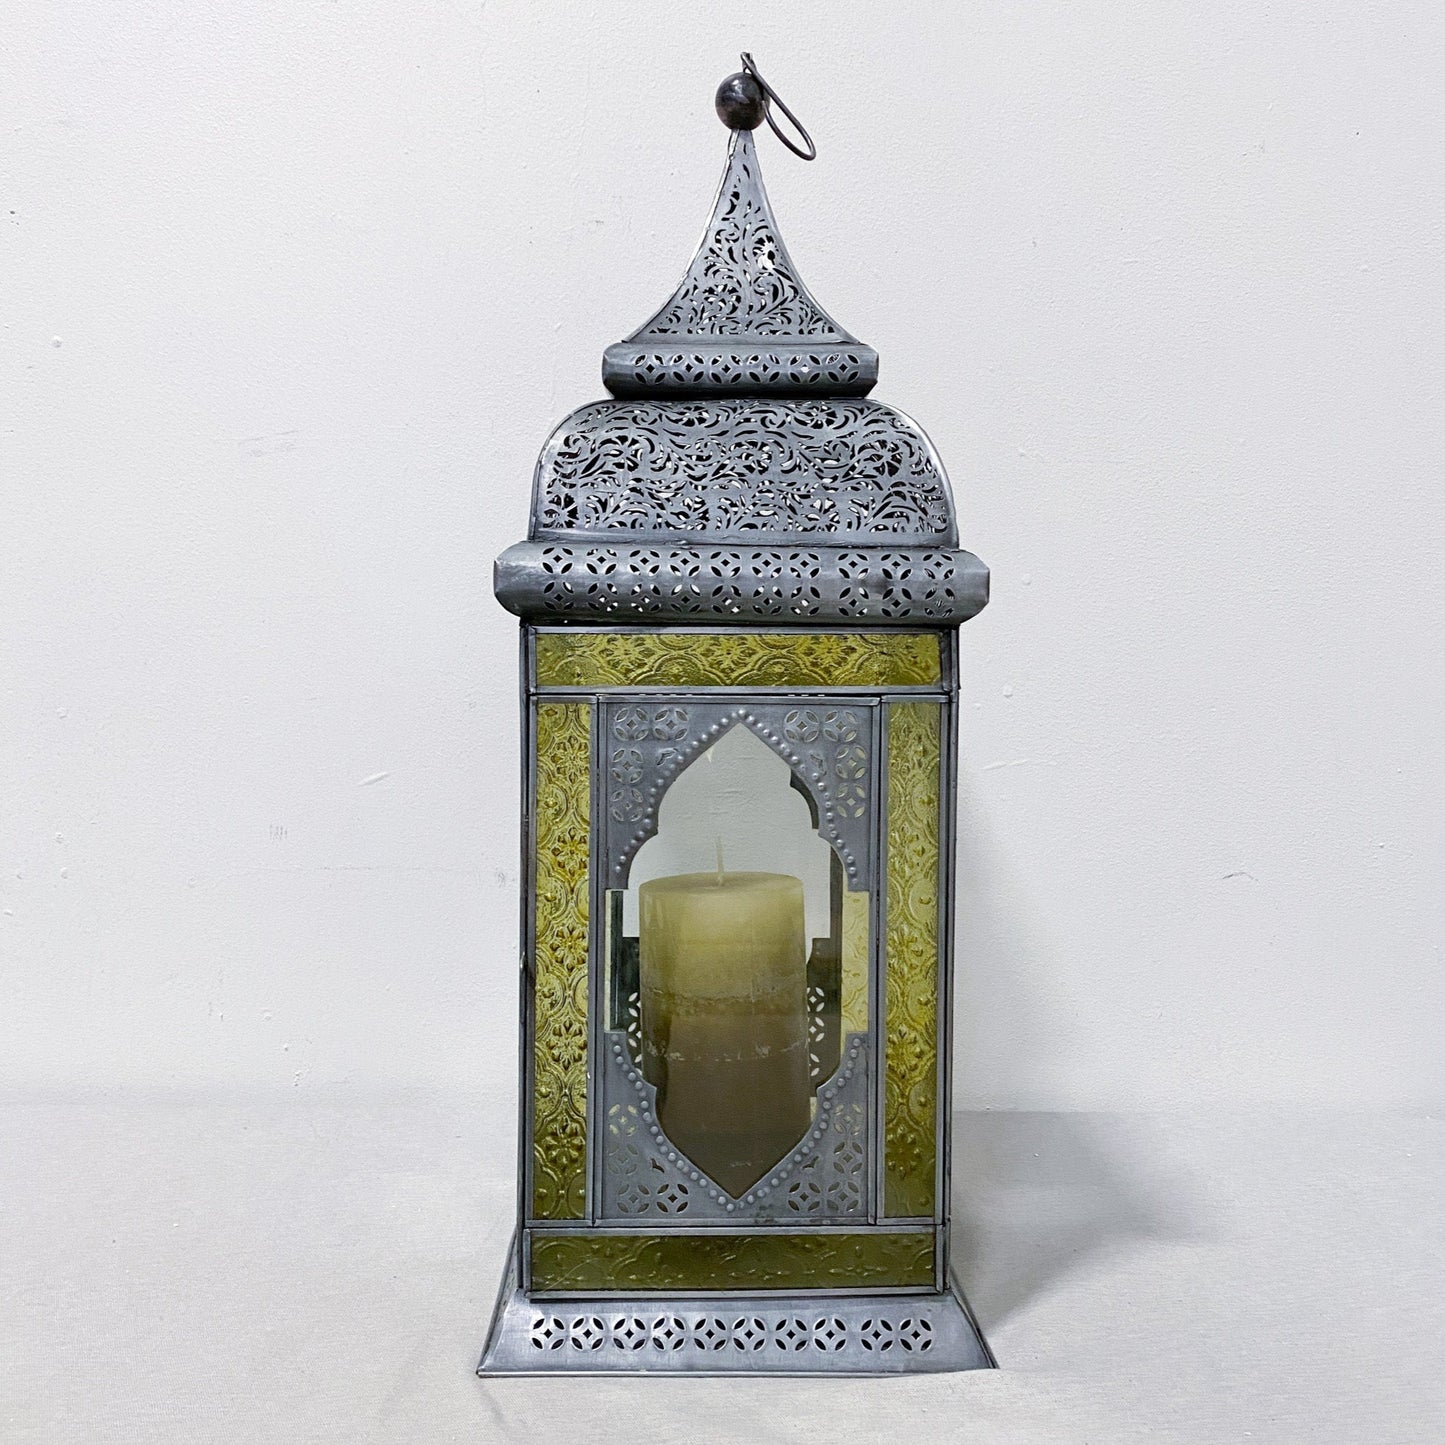 Moroccan Style Candle Lantern